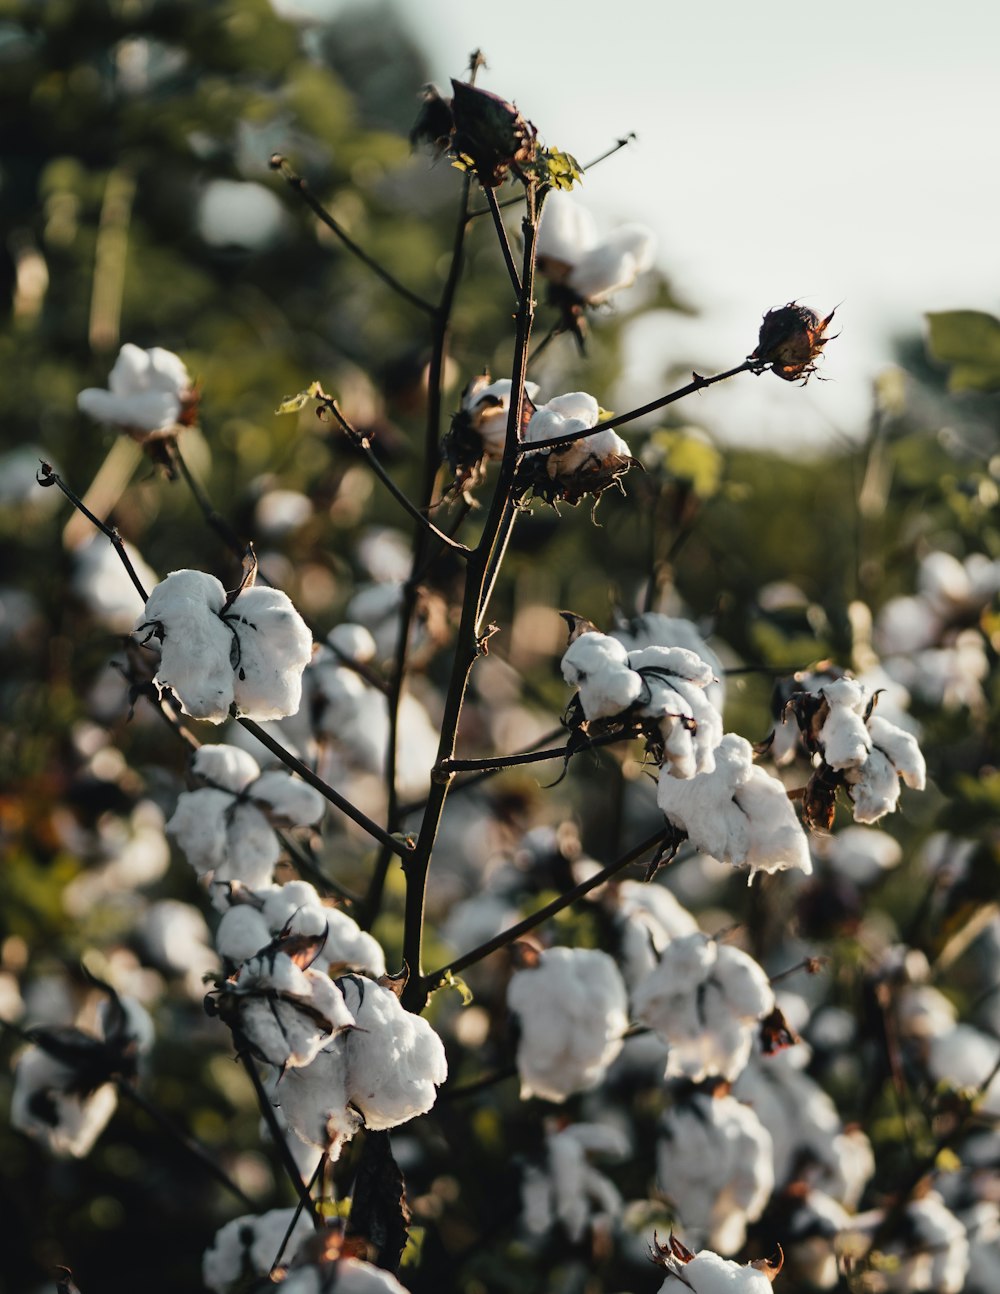 a close up of a cotton plant with lots of white flowers